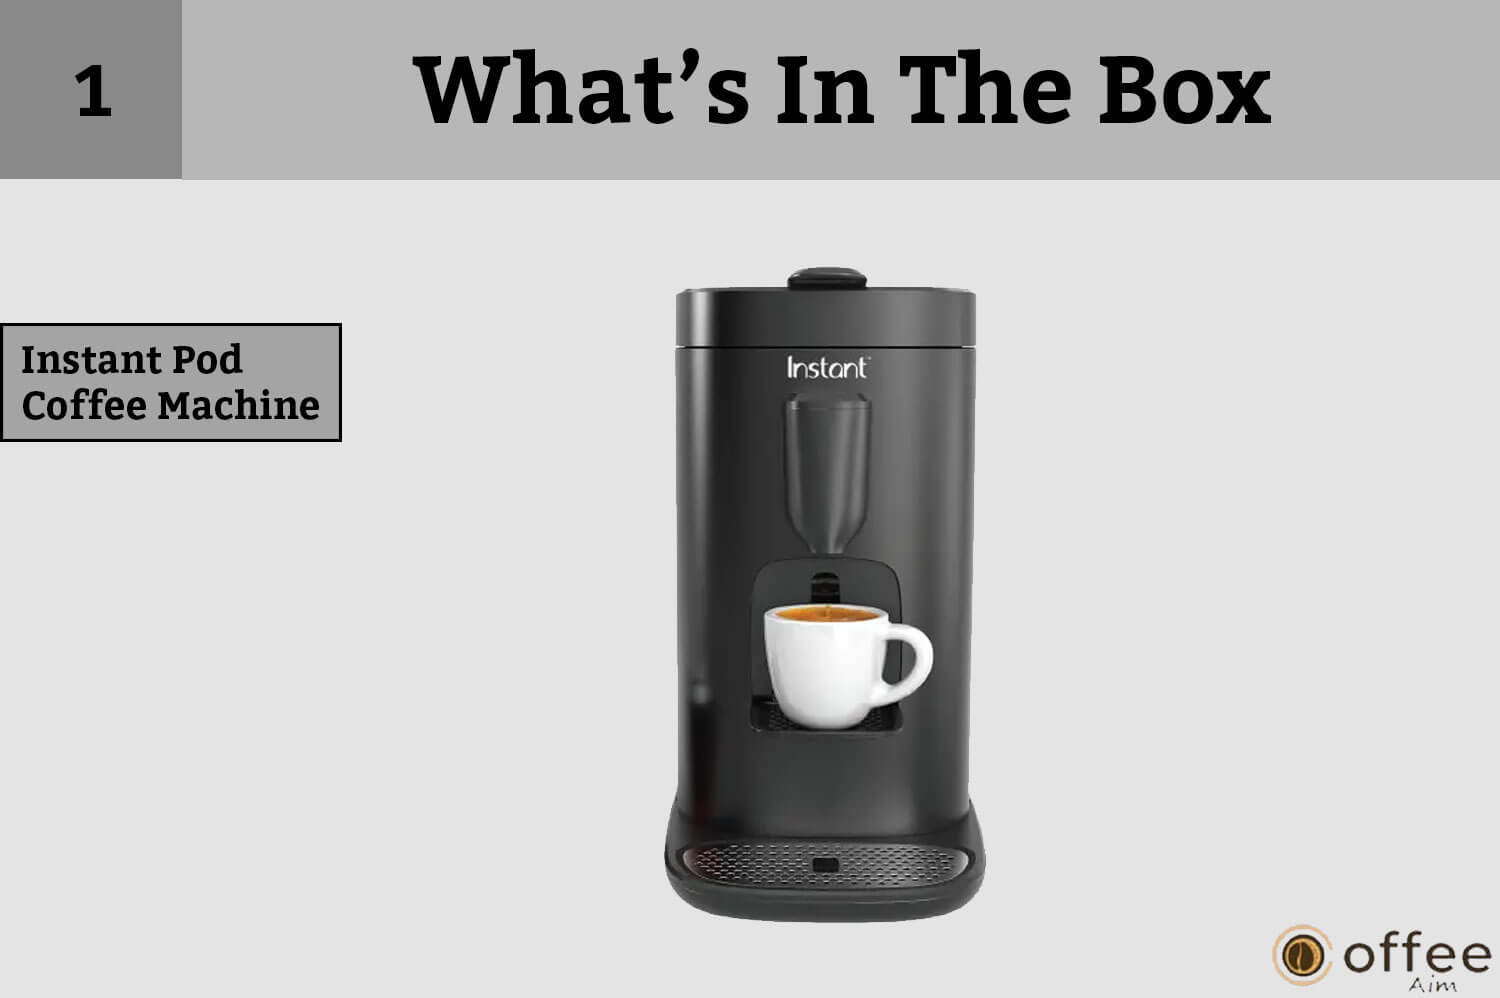 This image provides a visual representation of the "Instant Pod Coffee Machine" as featured in our article on "How to Connect the Nespresso Vertuo Creatista Machine."